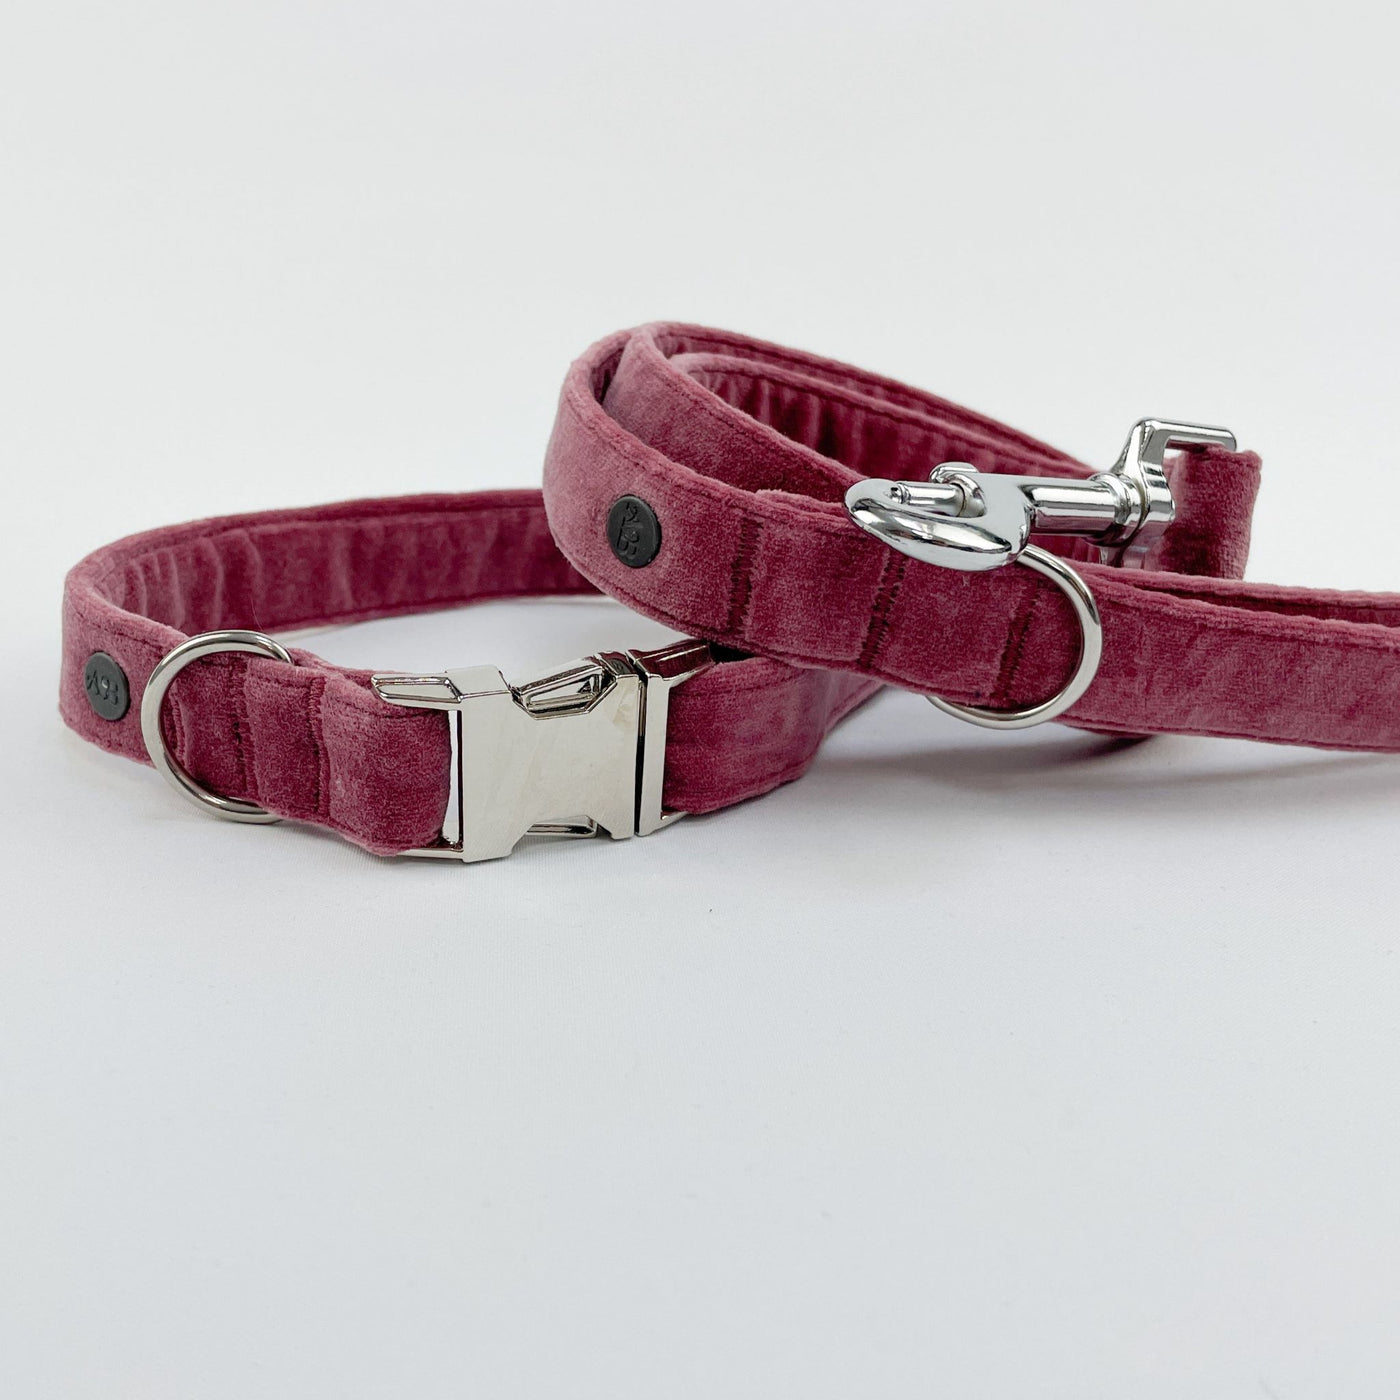 Matching dog lead and collar in luxury blush pink velvet.